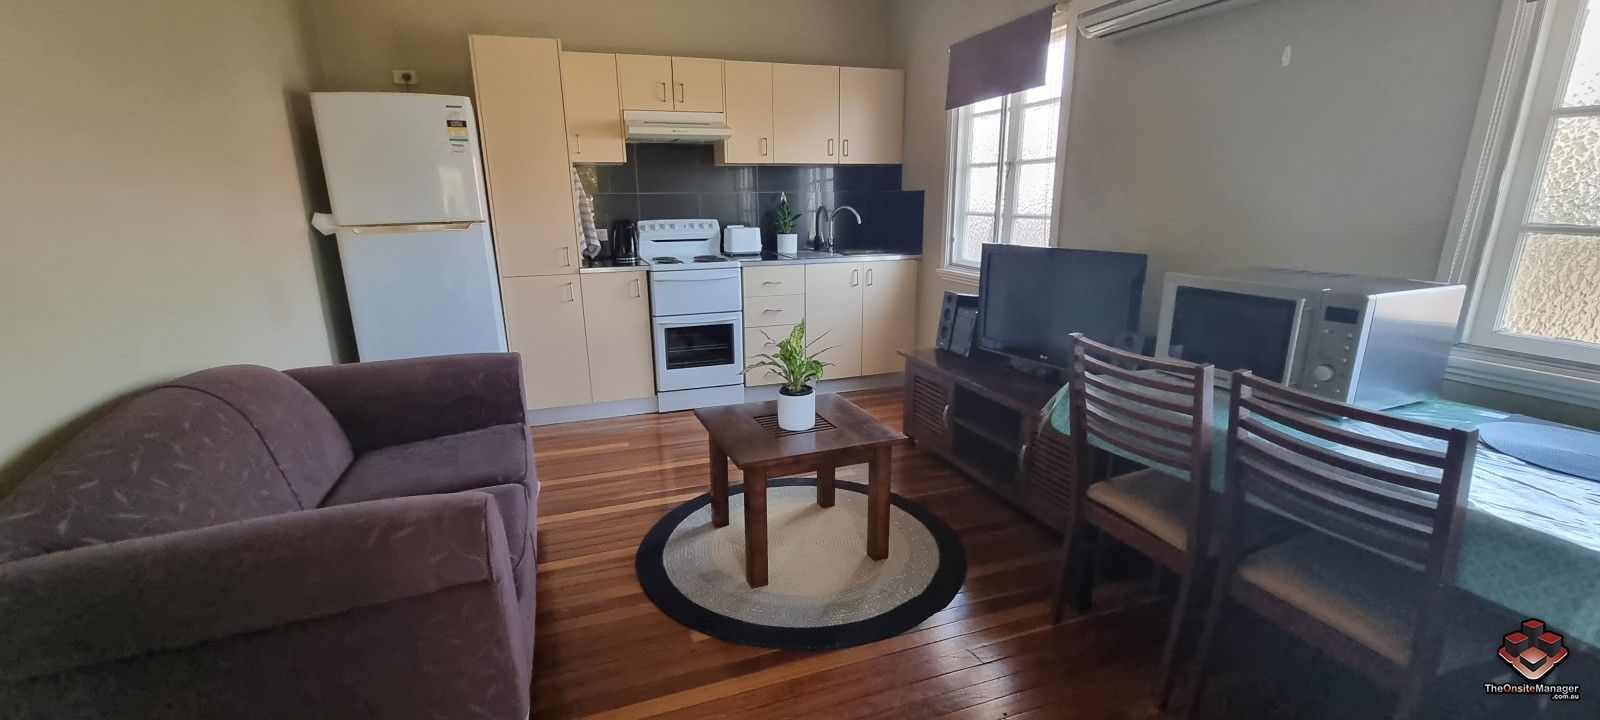 2 bedrooms Apartment / Unit / Flat in  COOPERS PLAINS QLD, 4108